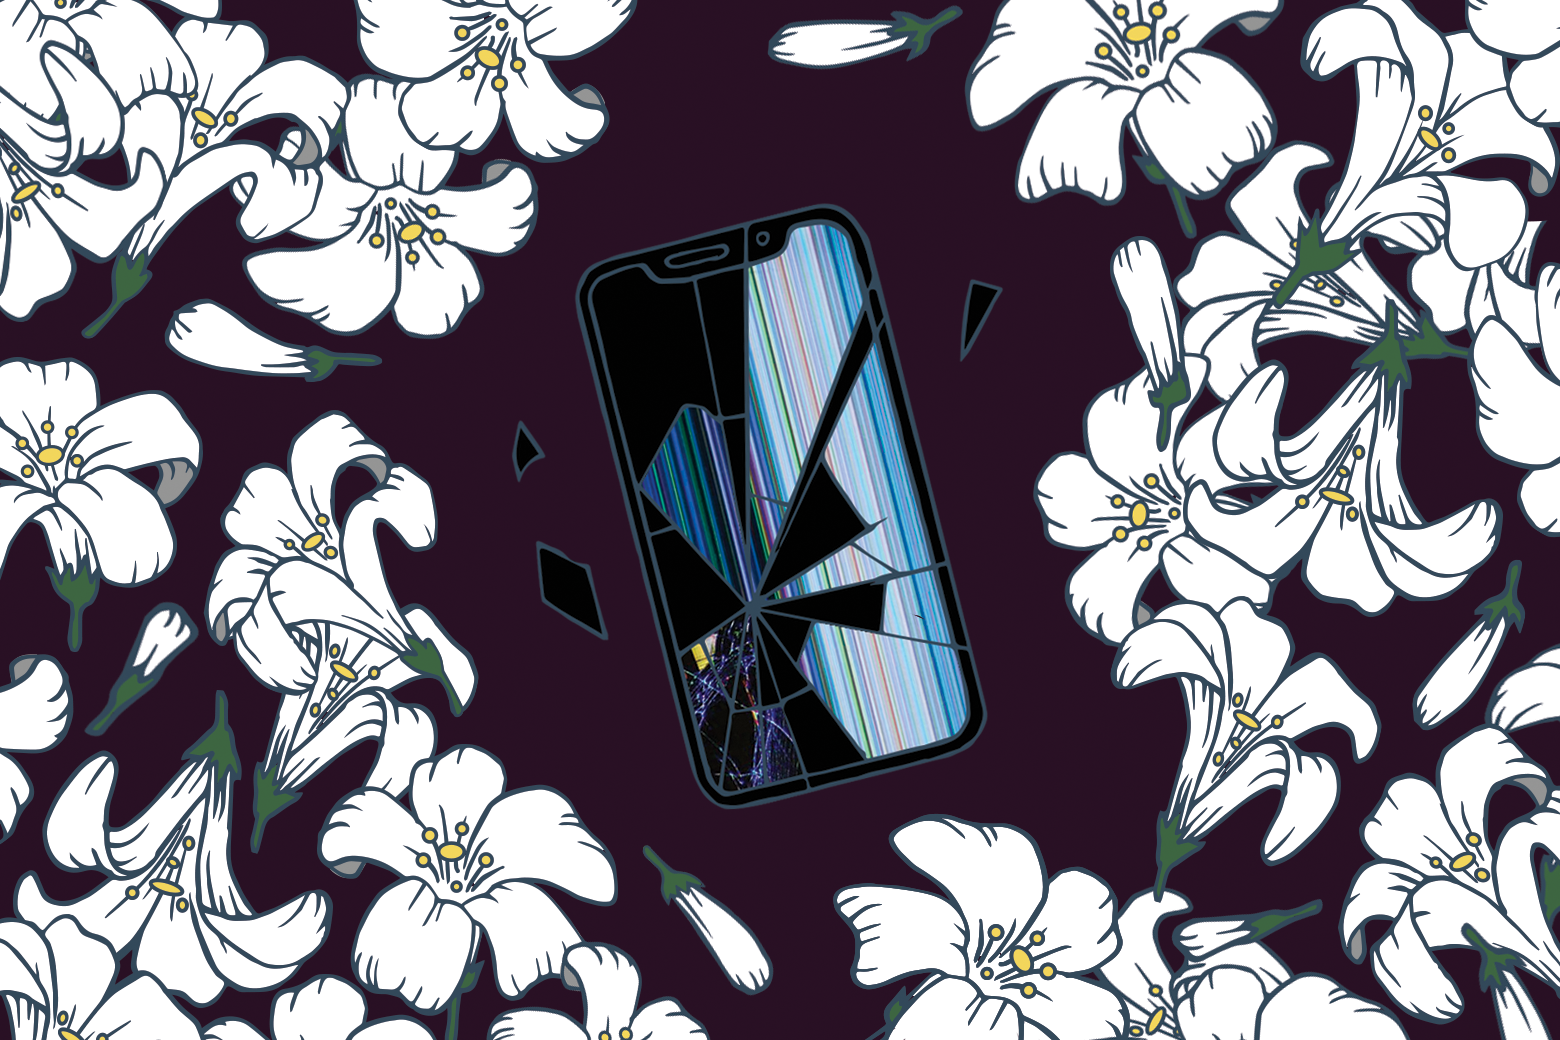 Flowers surround a cracked smartphone screen.